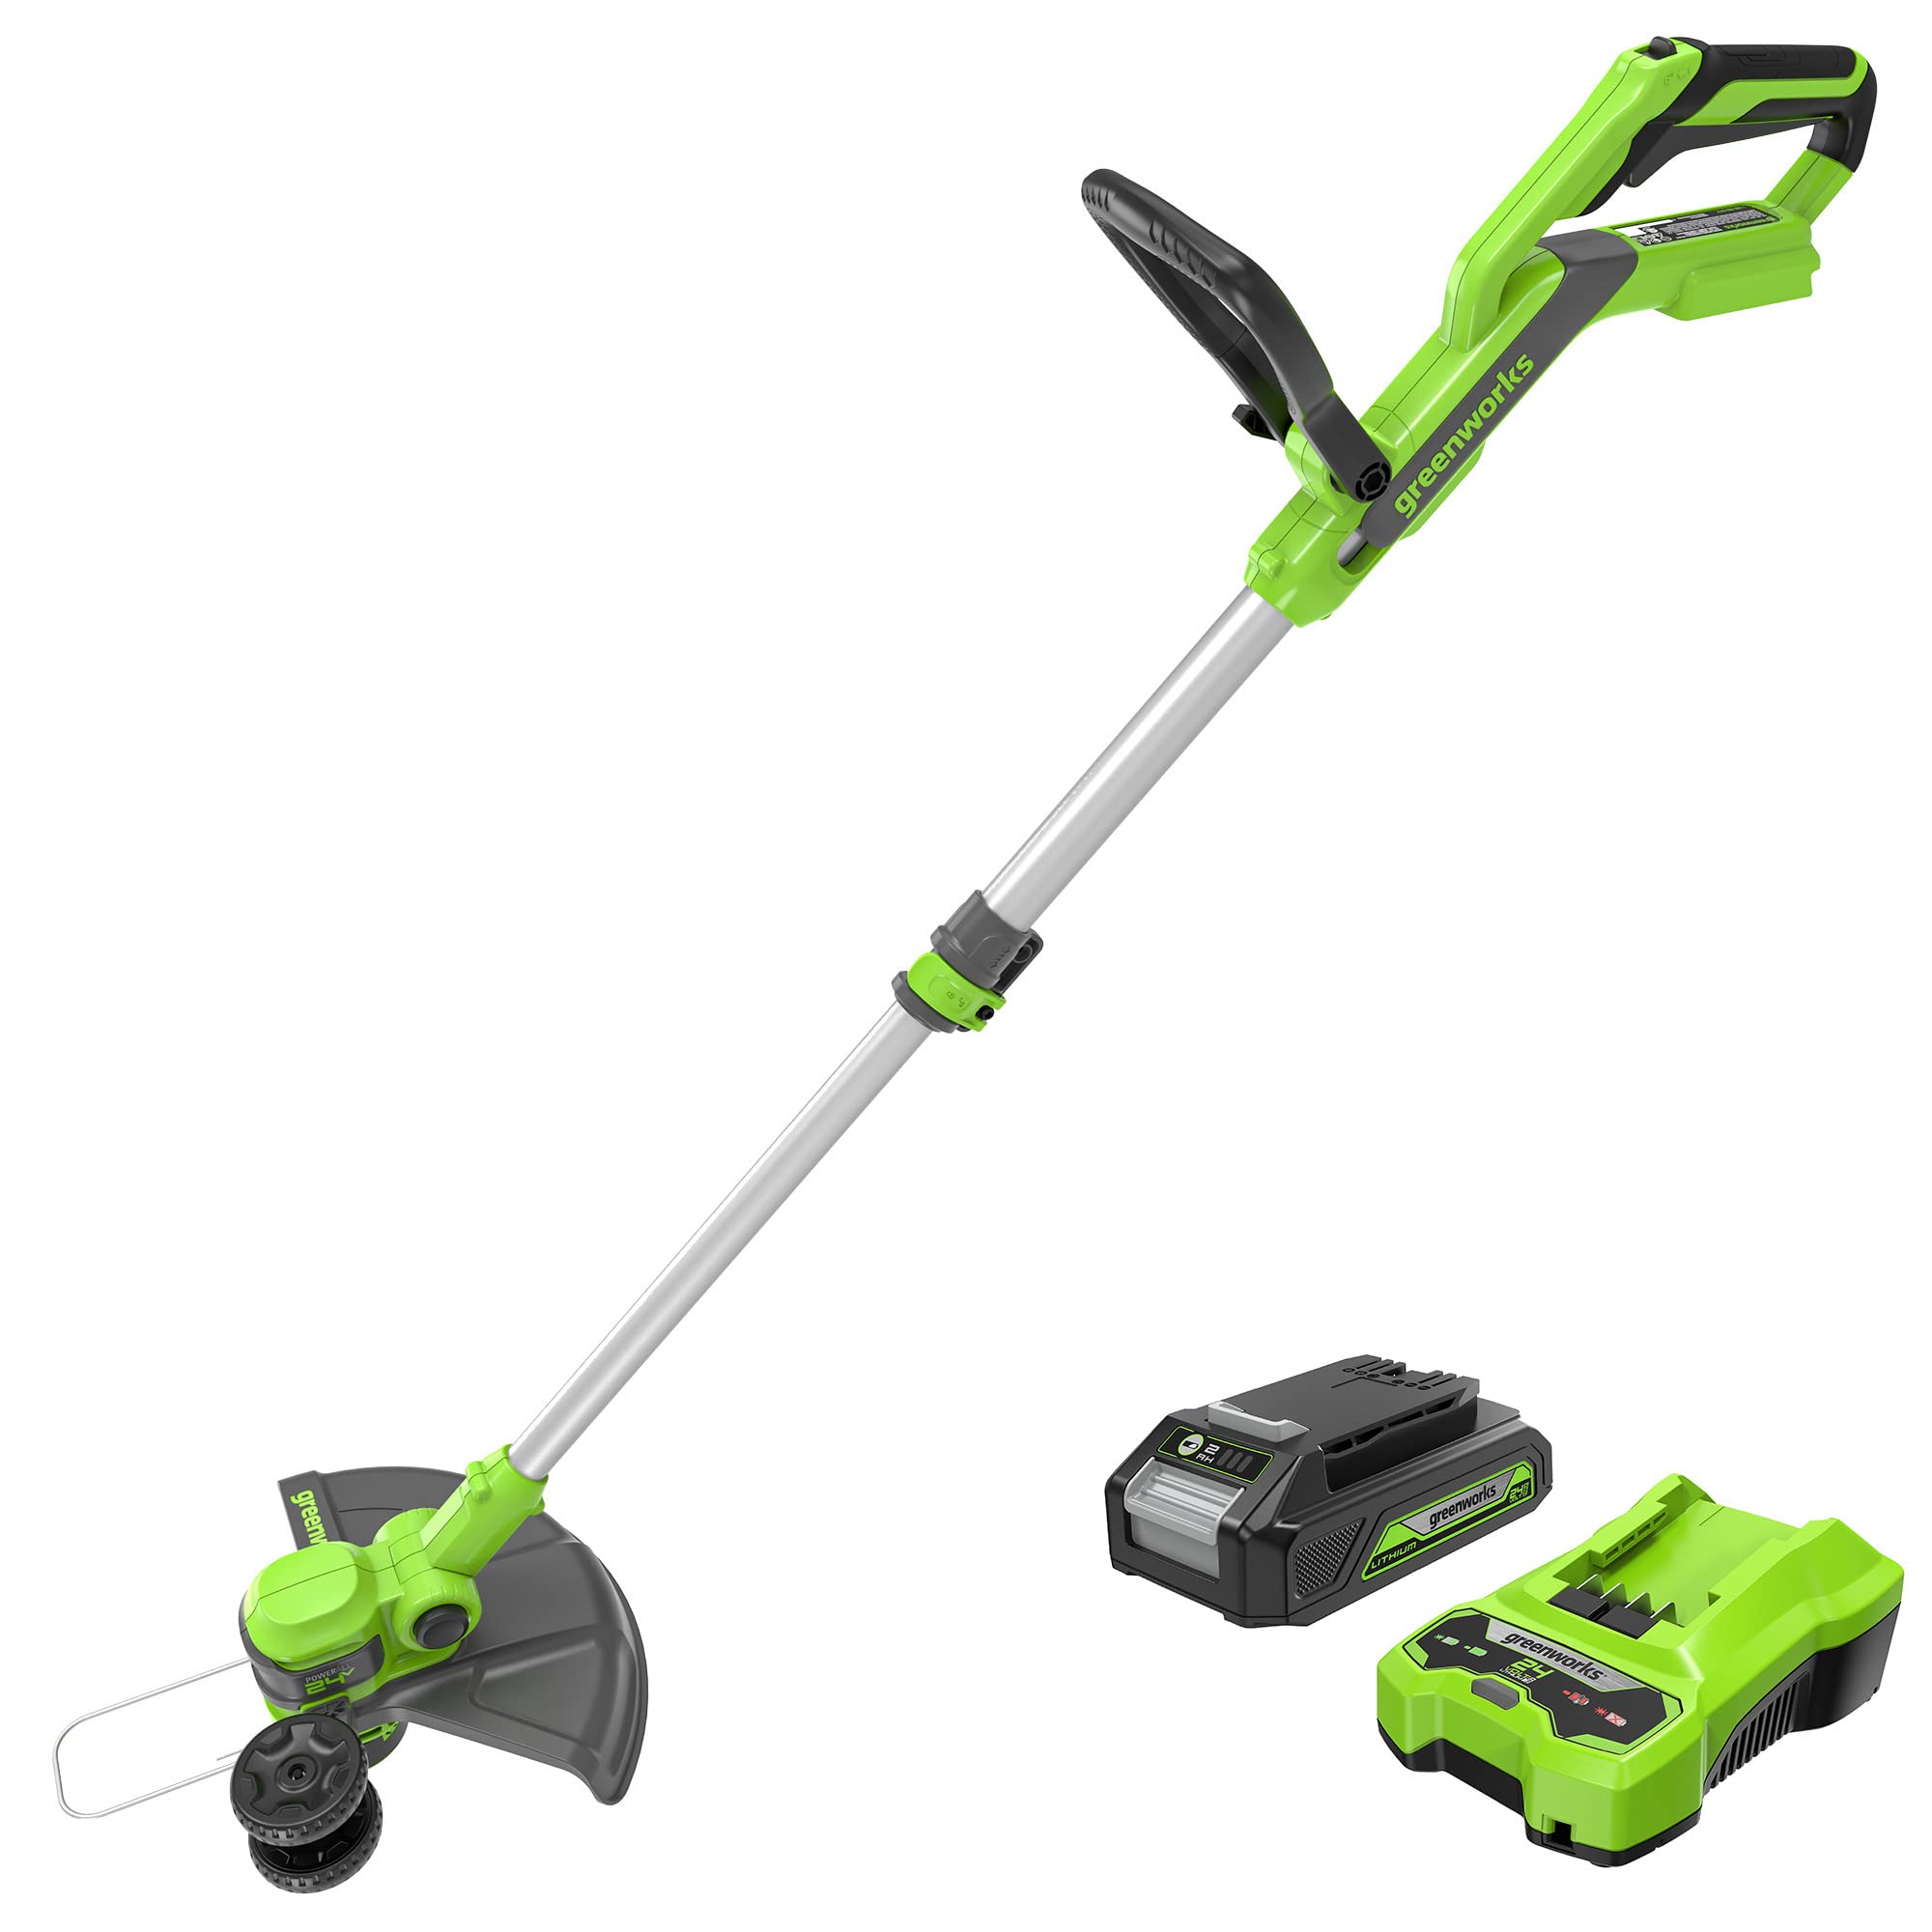 24V 12-Inch Greenworks Cordless String Trimmer/Edger (Gen 2) w/ 2.0Ah USB Battery & Charger $66.10 + Free Shipping